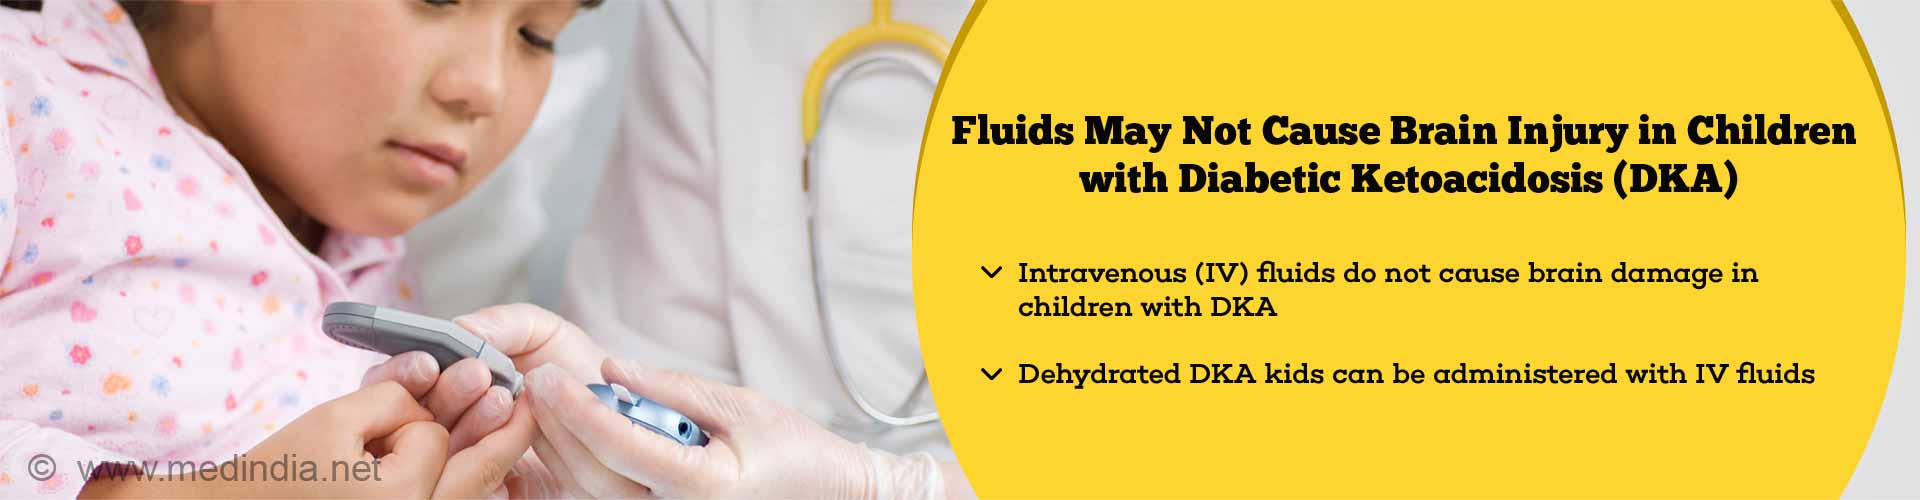 Fluids may not cause brain injury in children with diabetic ketoacidosis (DKA). Intravenous (IV) fluids do not cause brain damage in children with DKA. Dehydrated DKA kids can be administered with IV fluids.